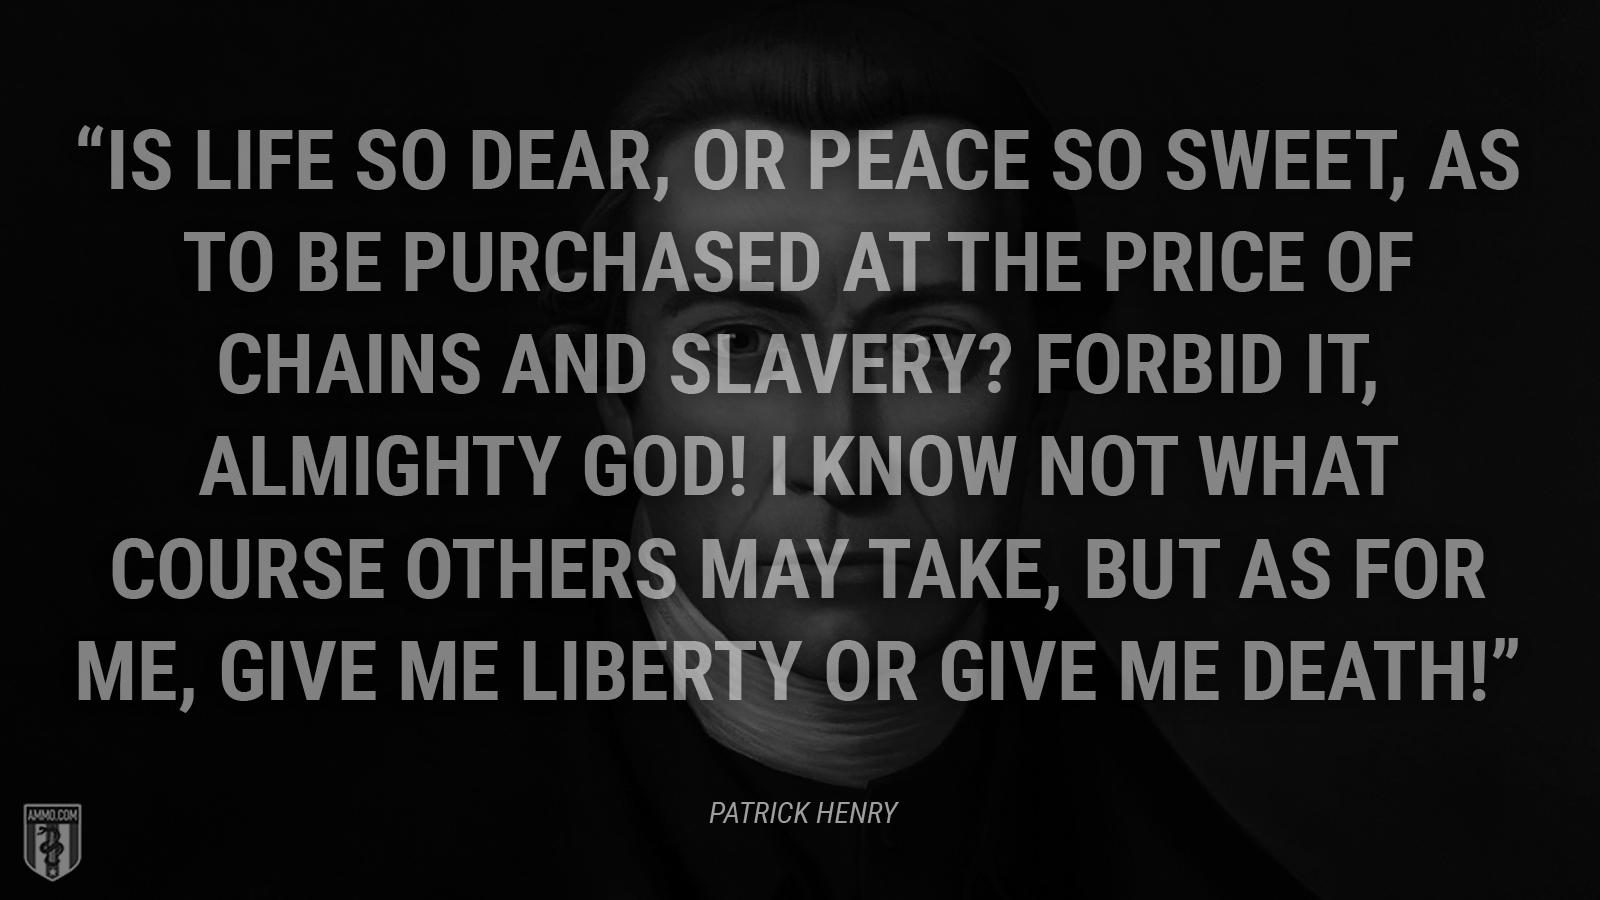 “Is life so dear, or peace so sweet, as to be purchased at the price of chains and slavery? Forbid it, Almighty God! I know not what course others may take, but as for me, give me liberty or give me death!” - Patrick Henry